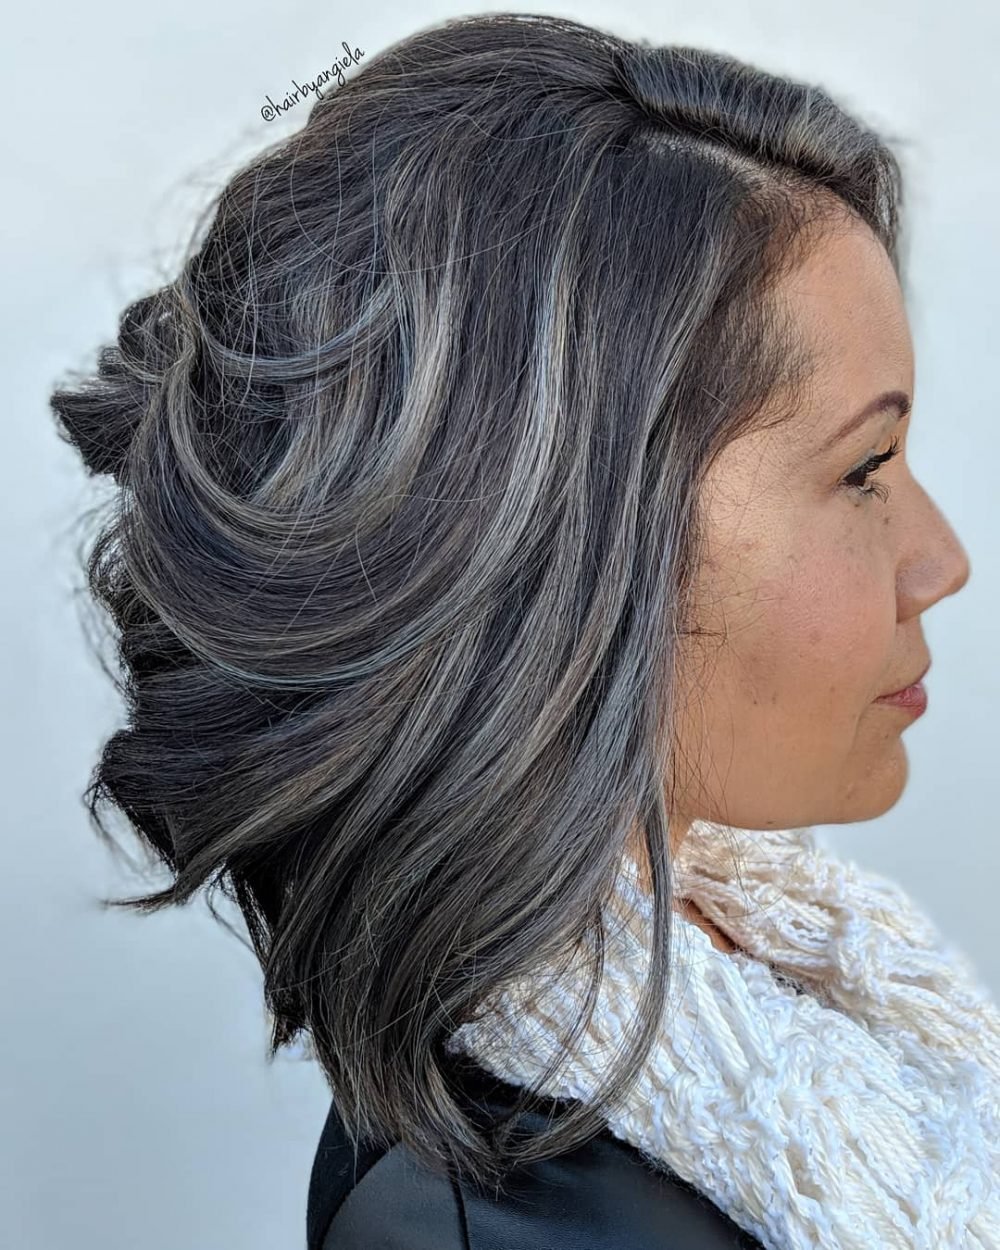 Dark Blue Hair &#8211; How to Get This Darker Hair Color in 2023